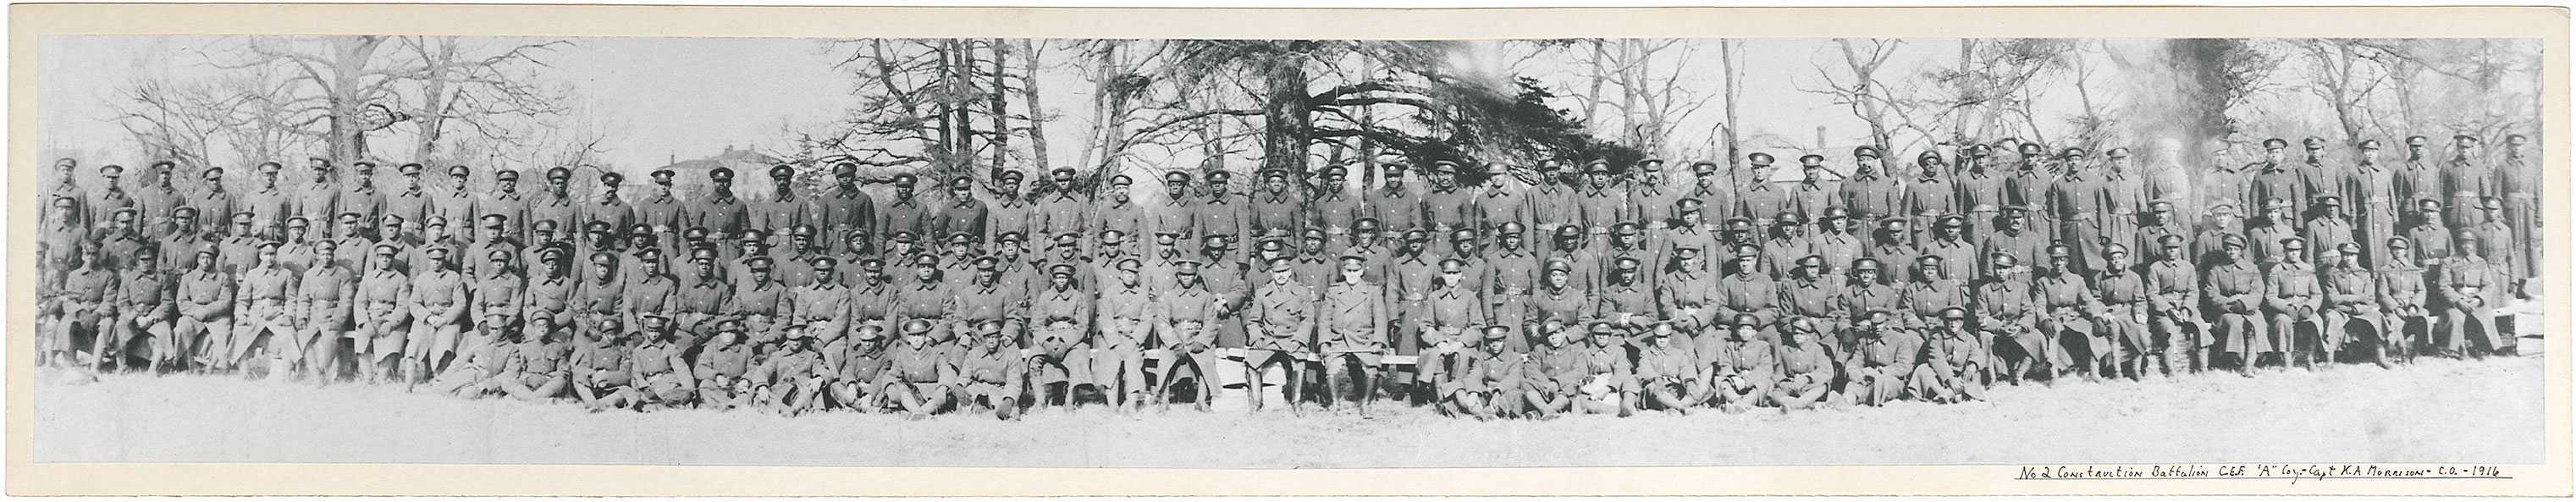 Black and white photograph. A large group of majority black men sit for a group photo. Most are wearing long military coats. Trees and rooftops are visible in the background.